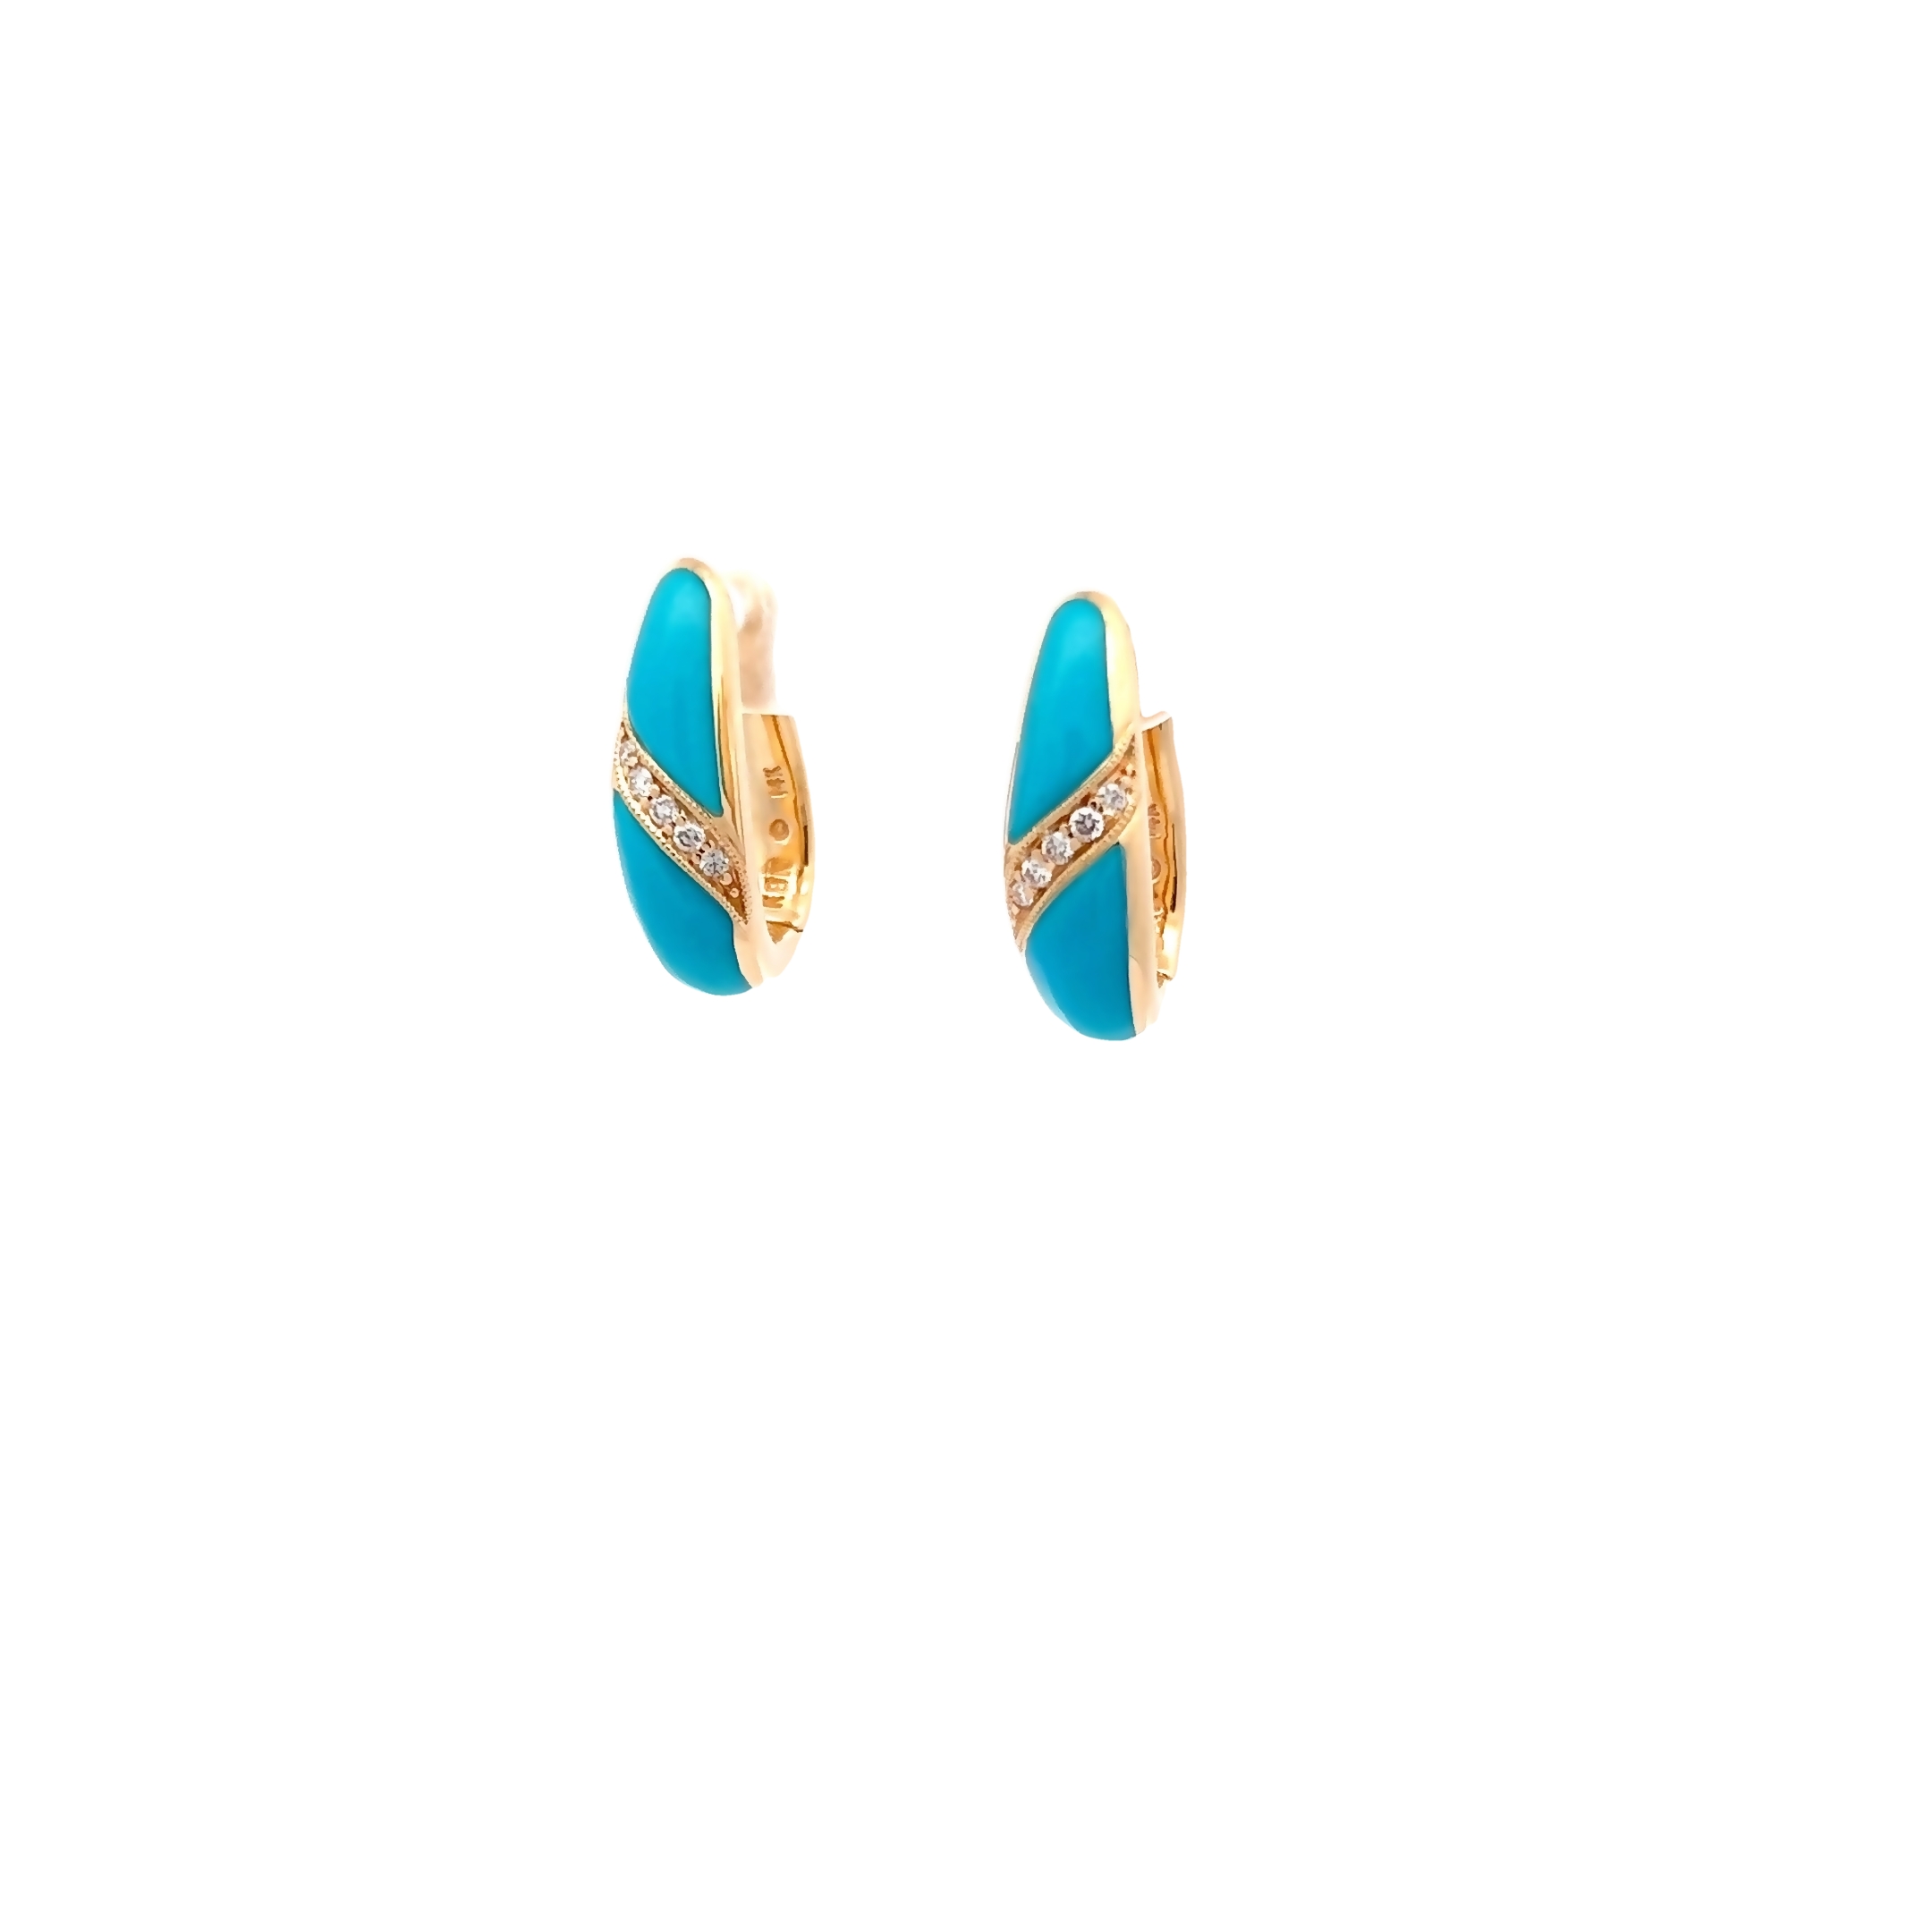 14 Karat yellow gold earrings with 10=0.09 total weight round brilliant G VS Diamonds and Sleeping BeautyTurquoise inlay